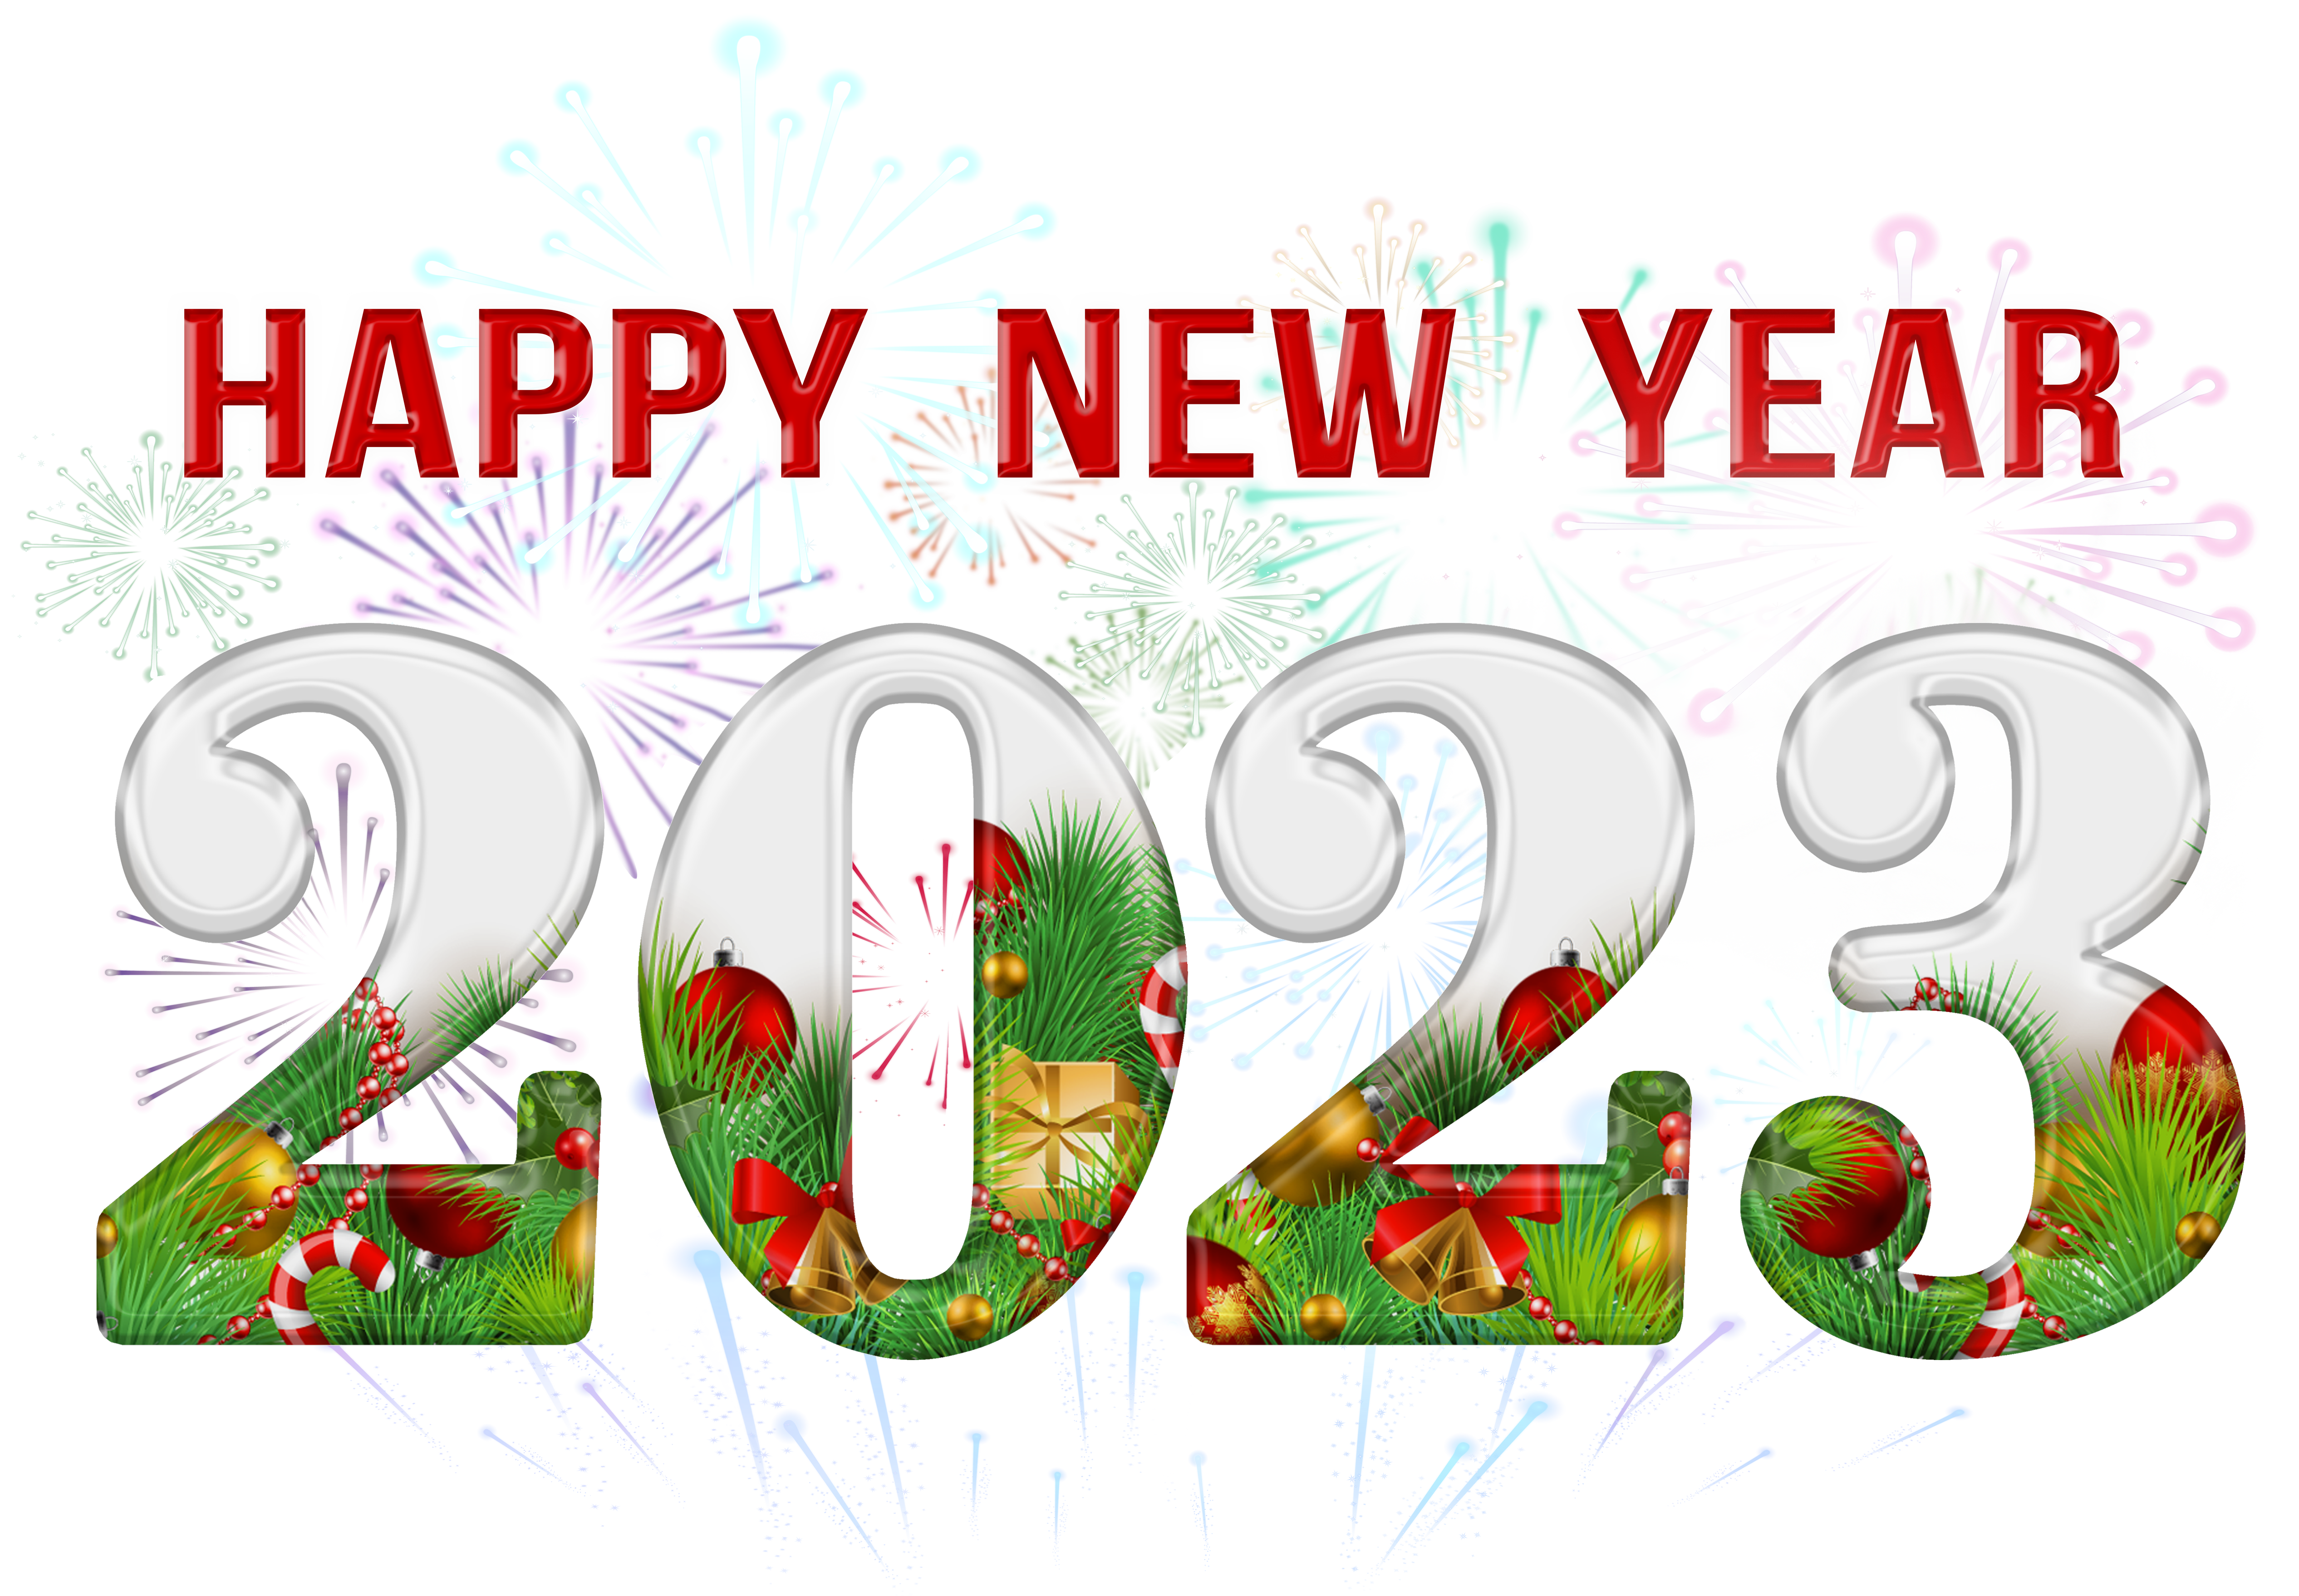 Happy New Year 2023 PNG Clipart​-Quality Free Image and Transparent PNG Clipart